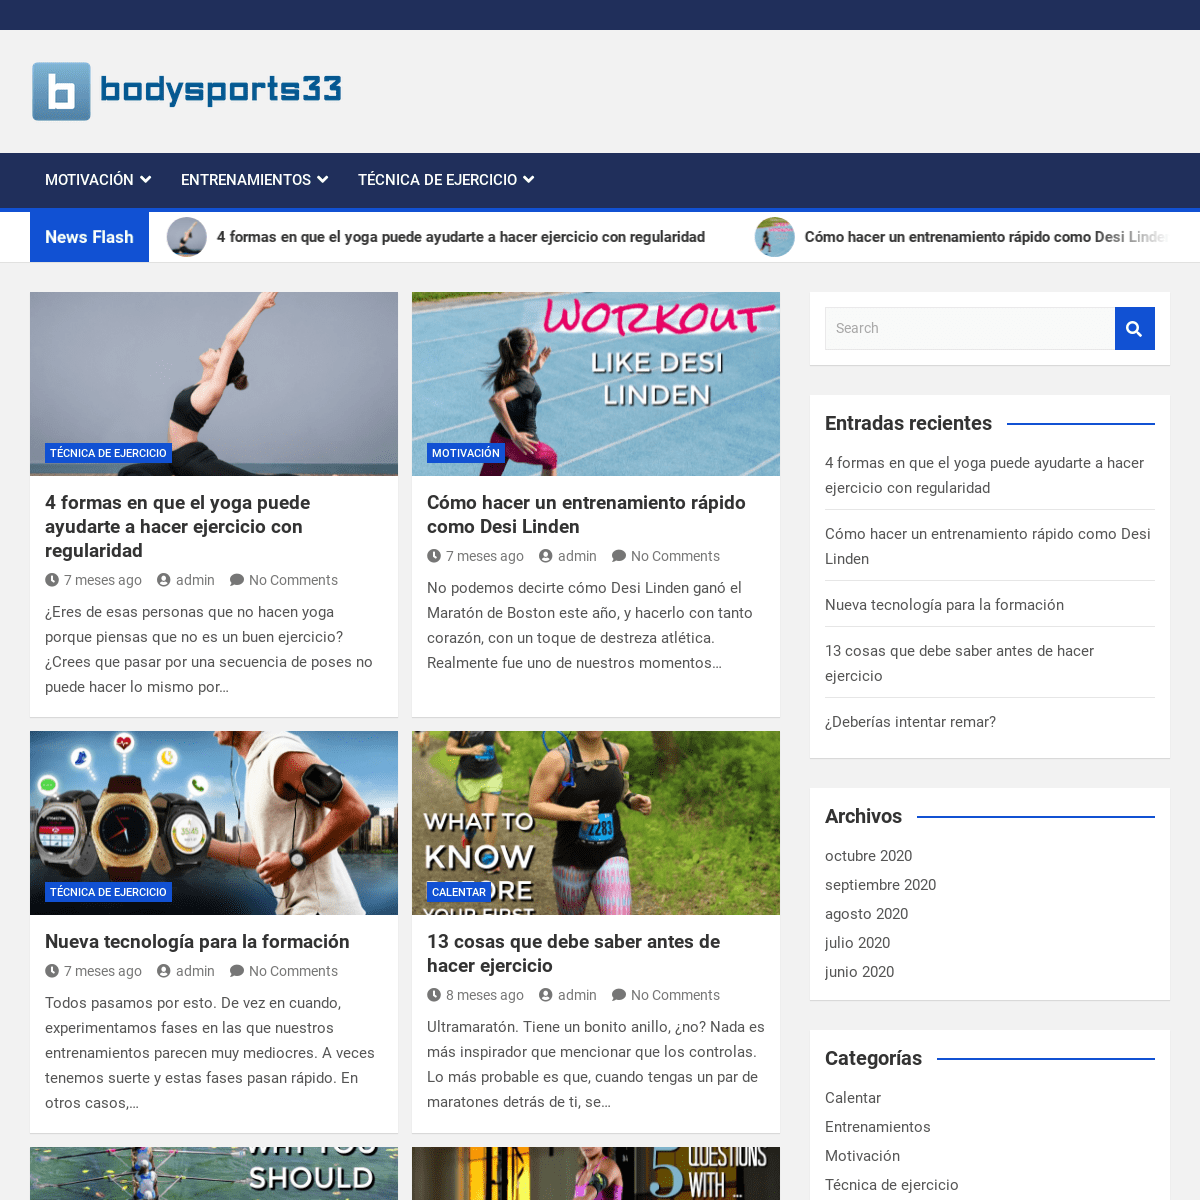 A complete backup of https://bodysports33.com